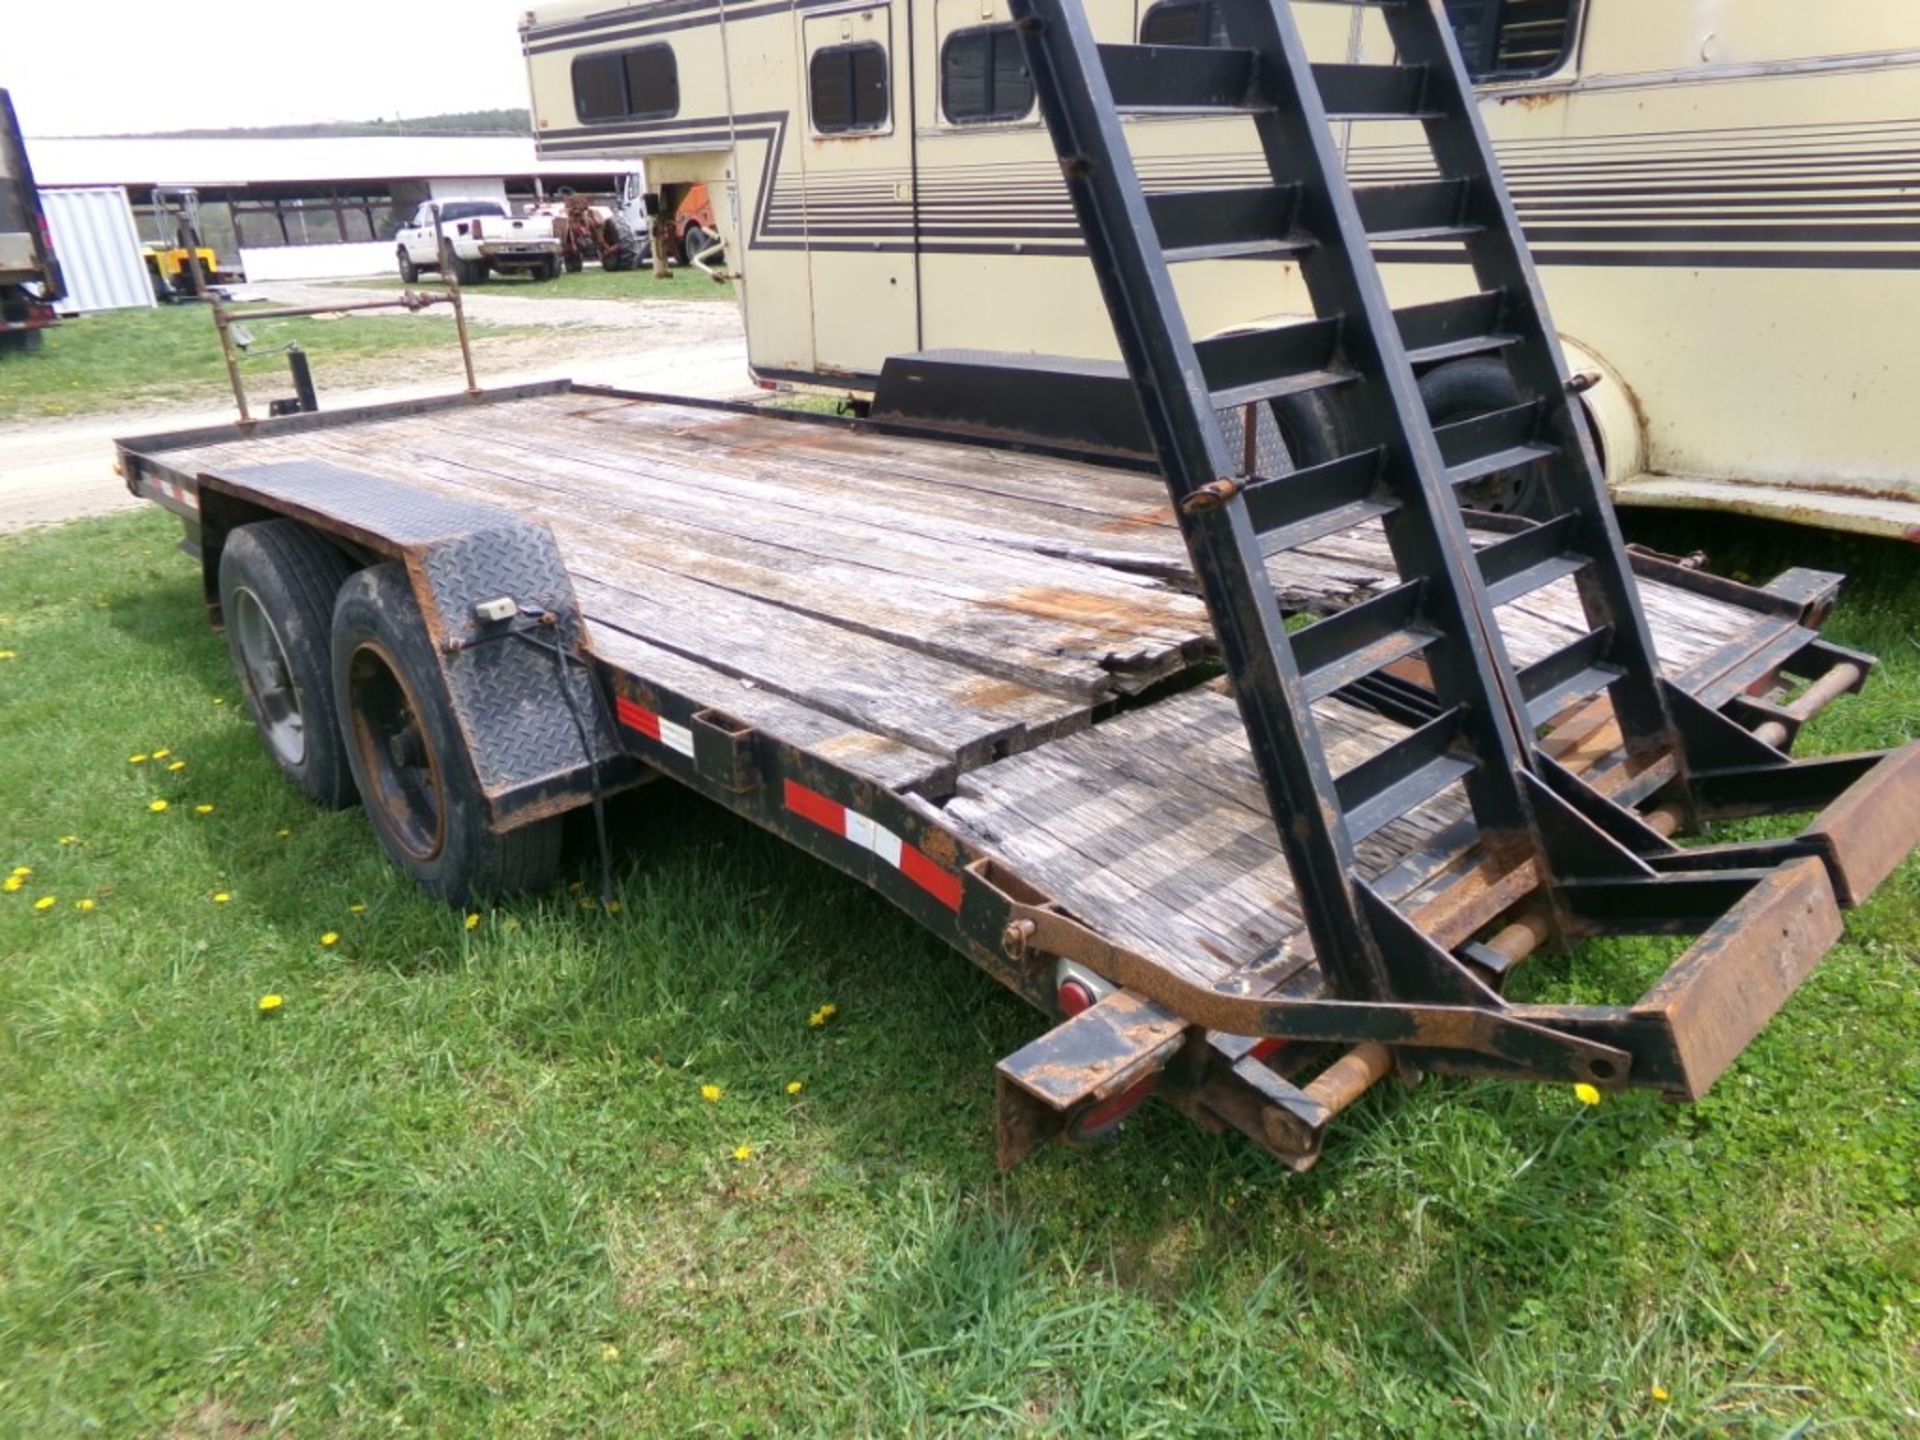 2016 Cross Country 18' Equipment Trailer, Tandem Axle, 18,400 GVW, Vin.# 431FS1826G1000536 - HAVE - Image 2 of 2